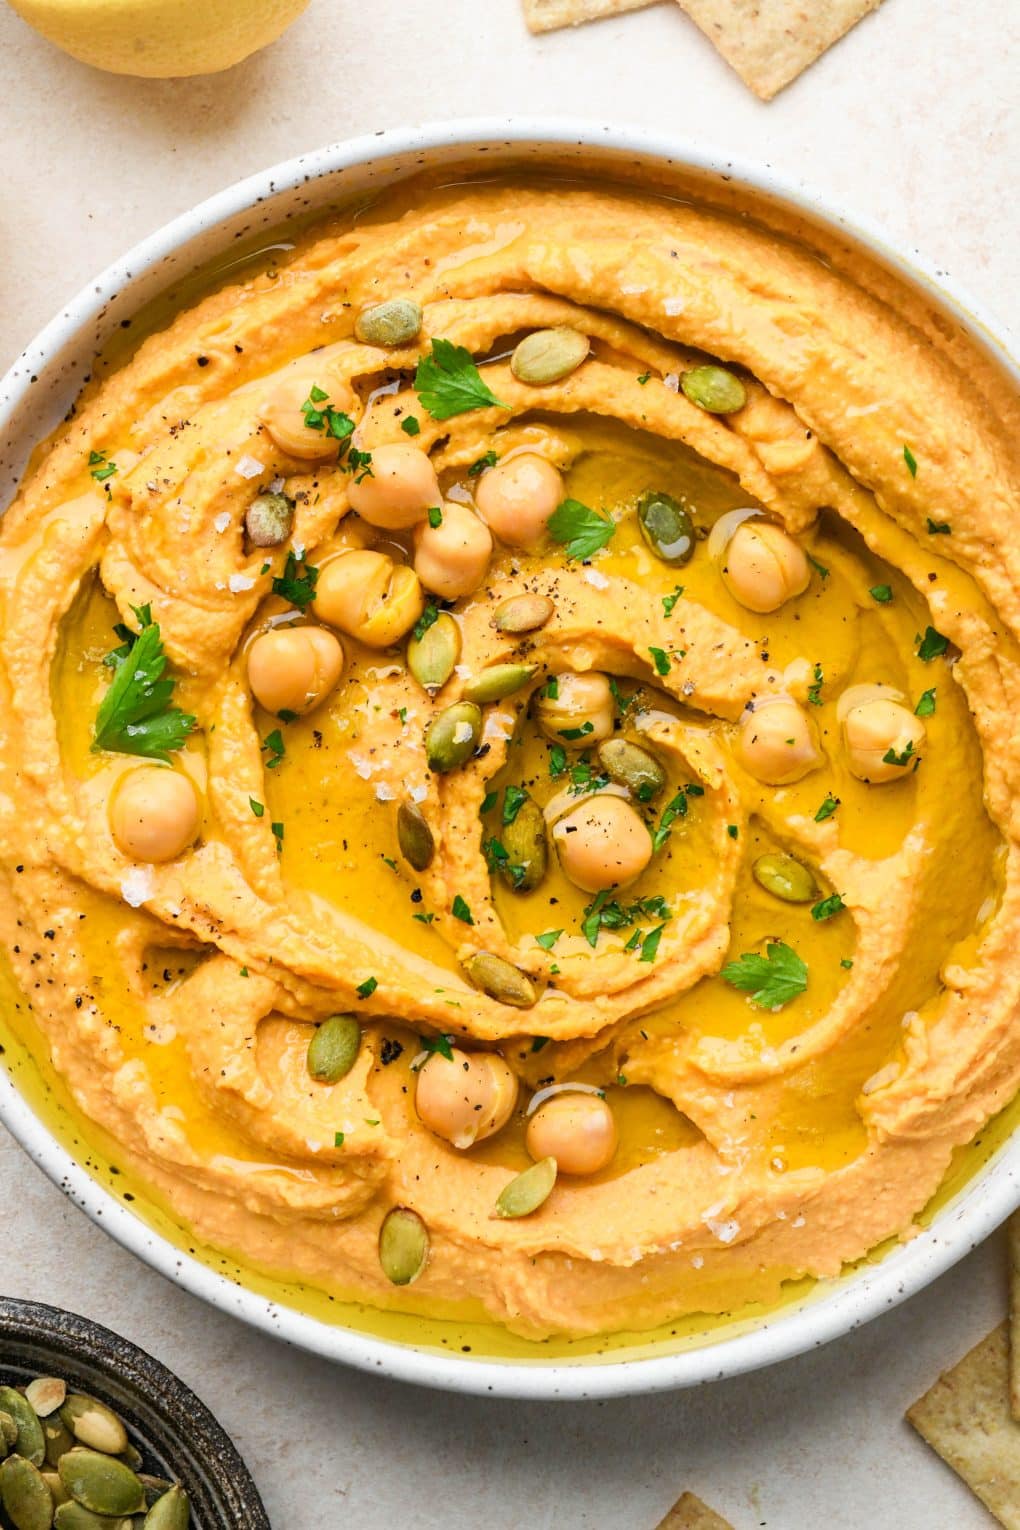 A shallow bowl of creamy sweet potato hummus topped with chickpeas, herbs, and pumpkin seeds.